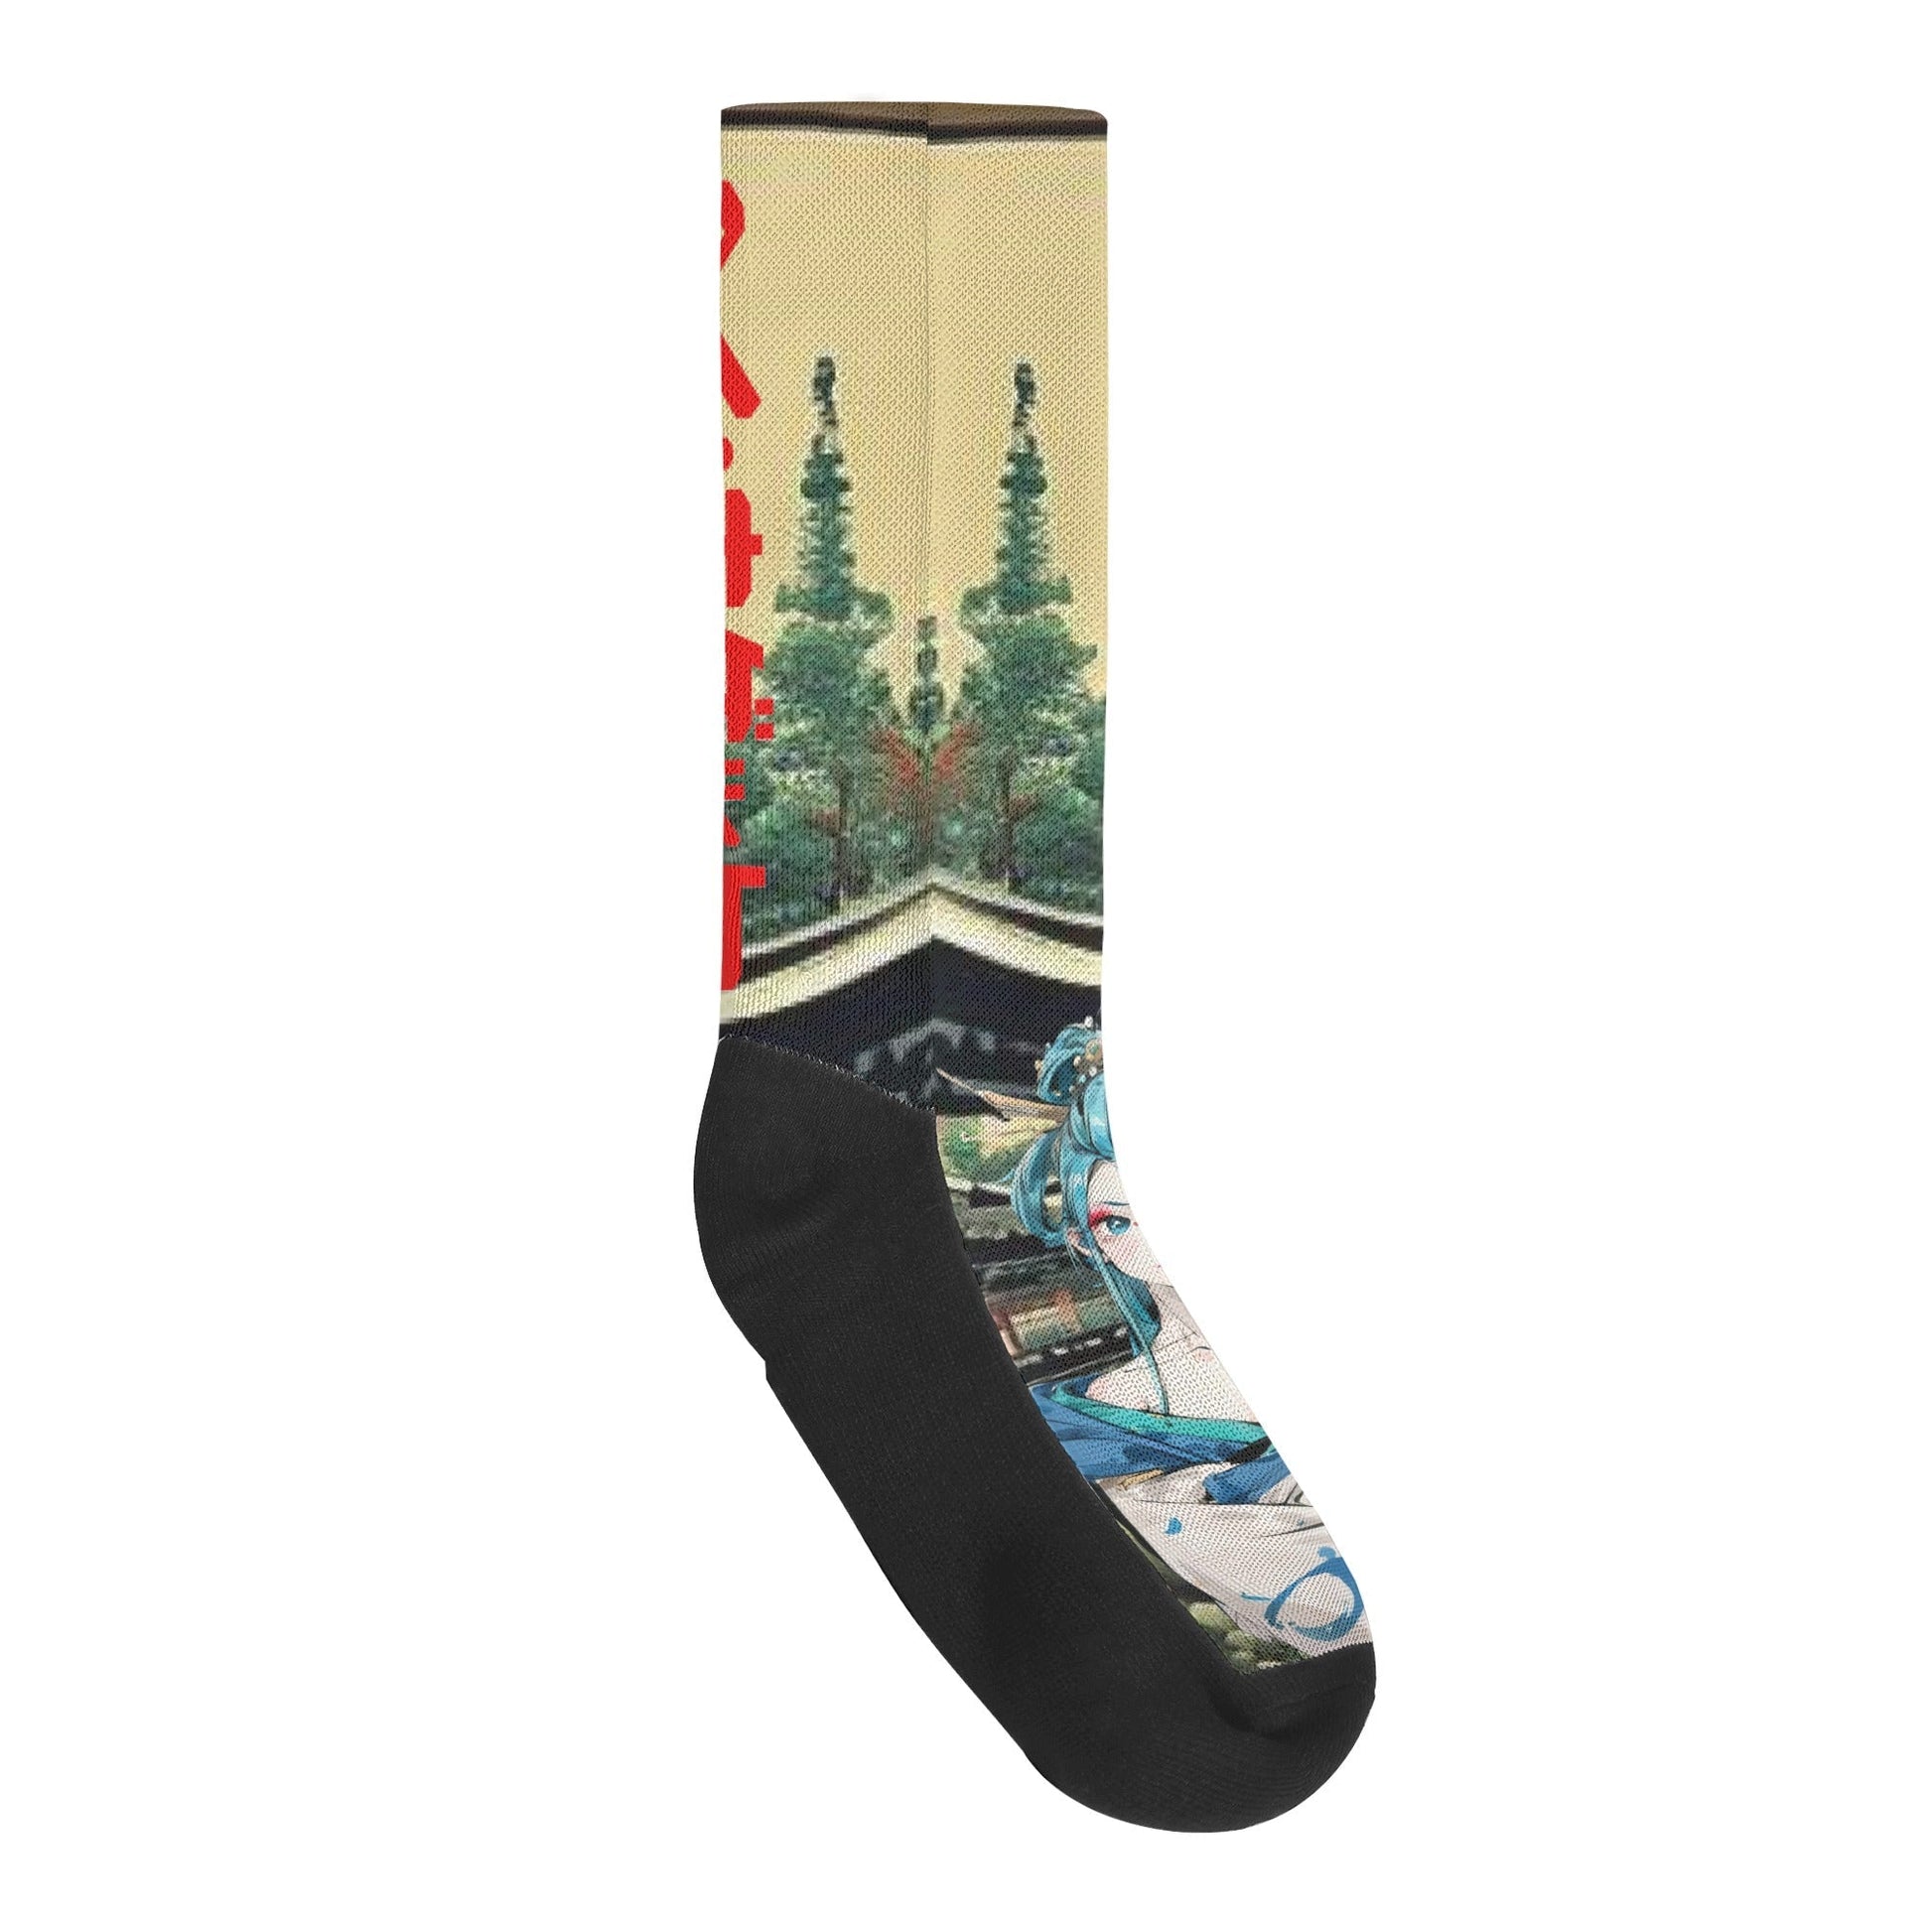 Stand out  with the  Tokyo Nugget Crew Socks  available at Hey Nugget. Grab yours today!